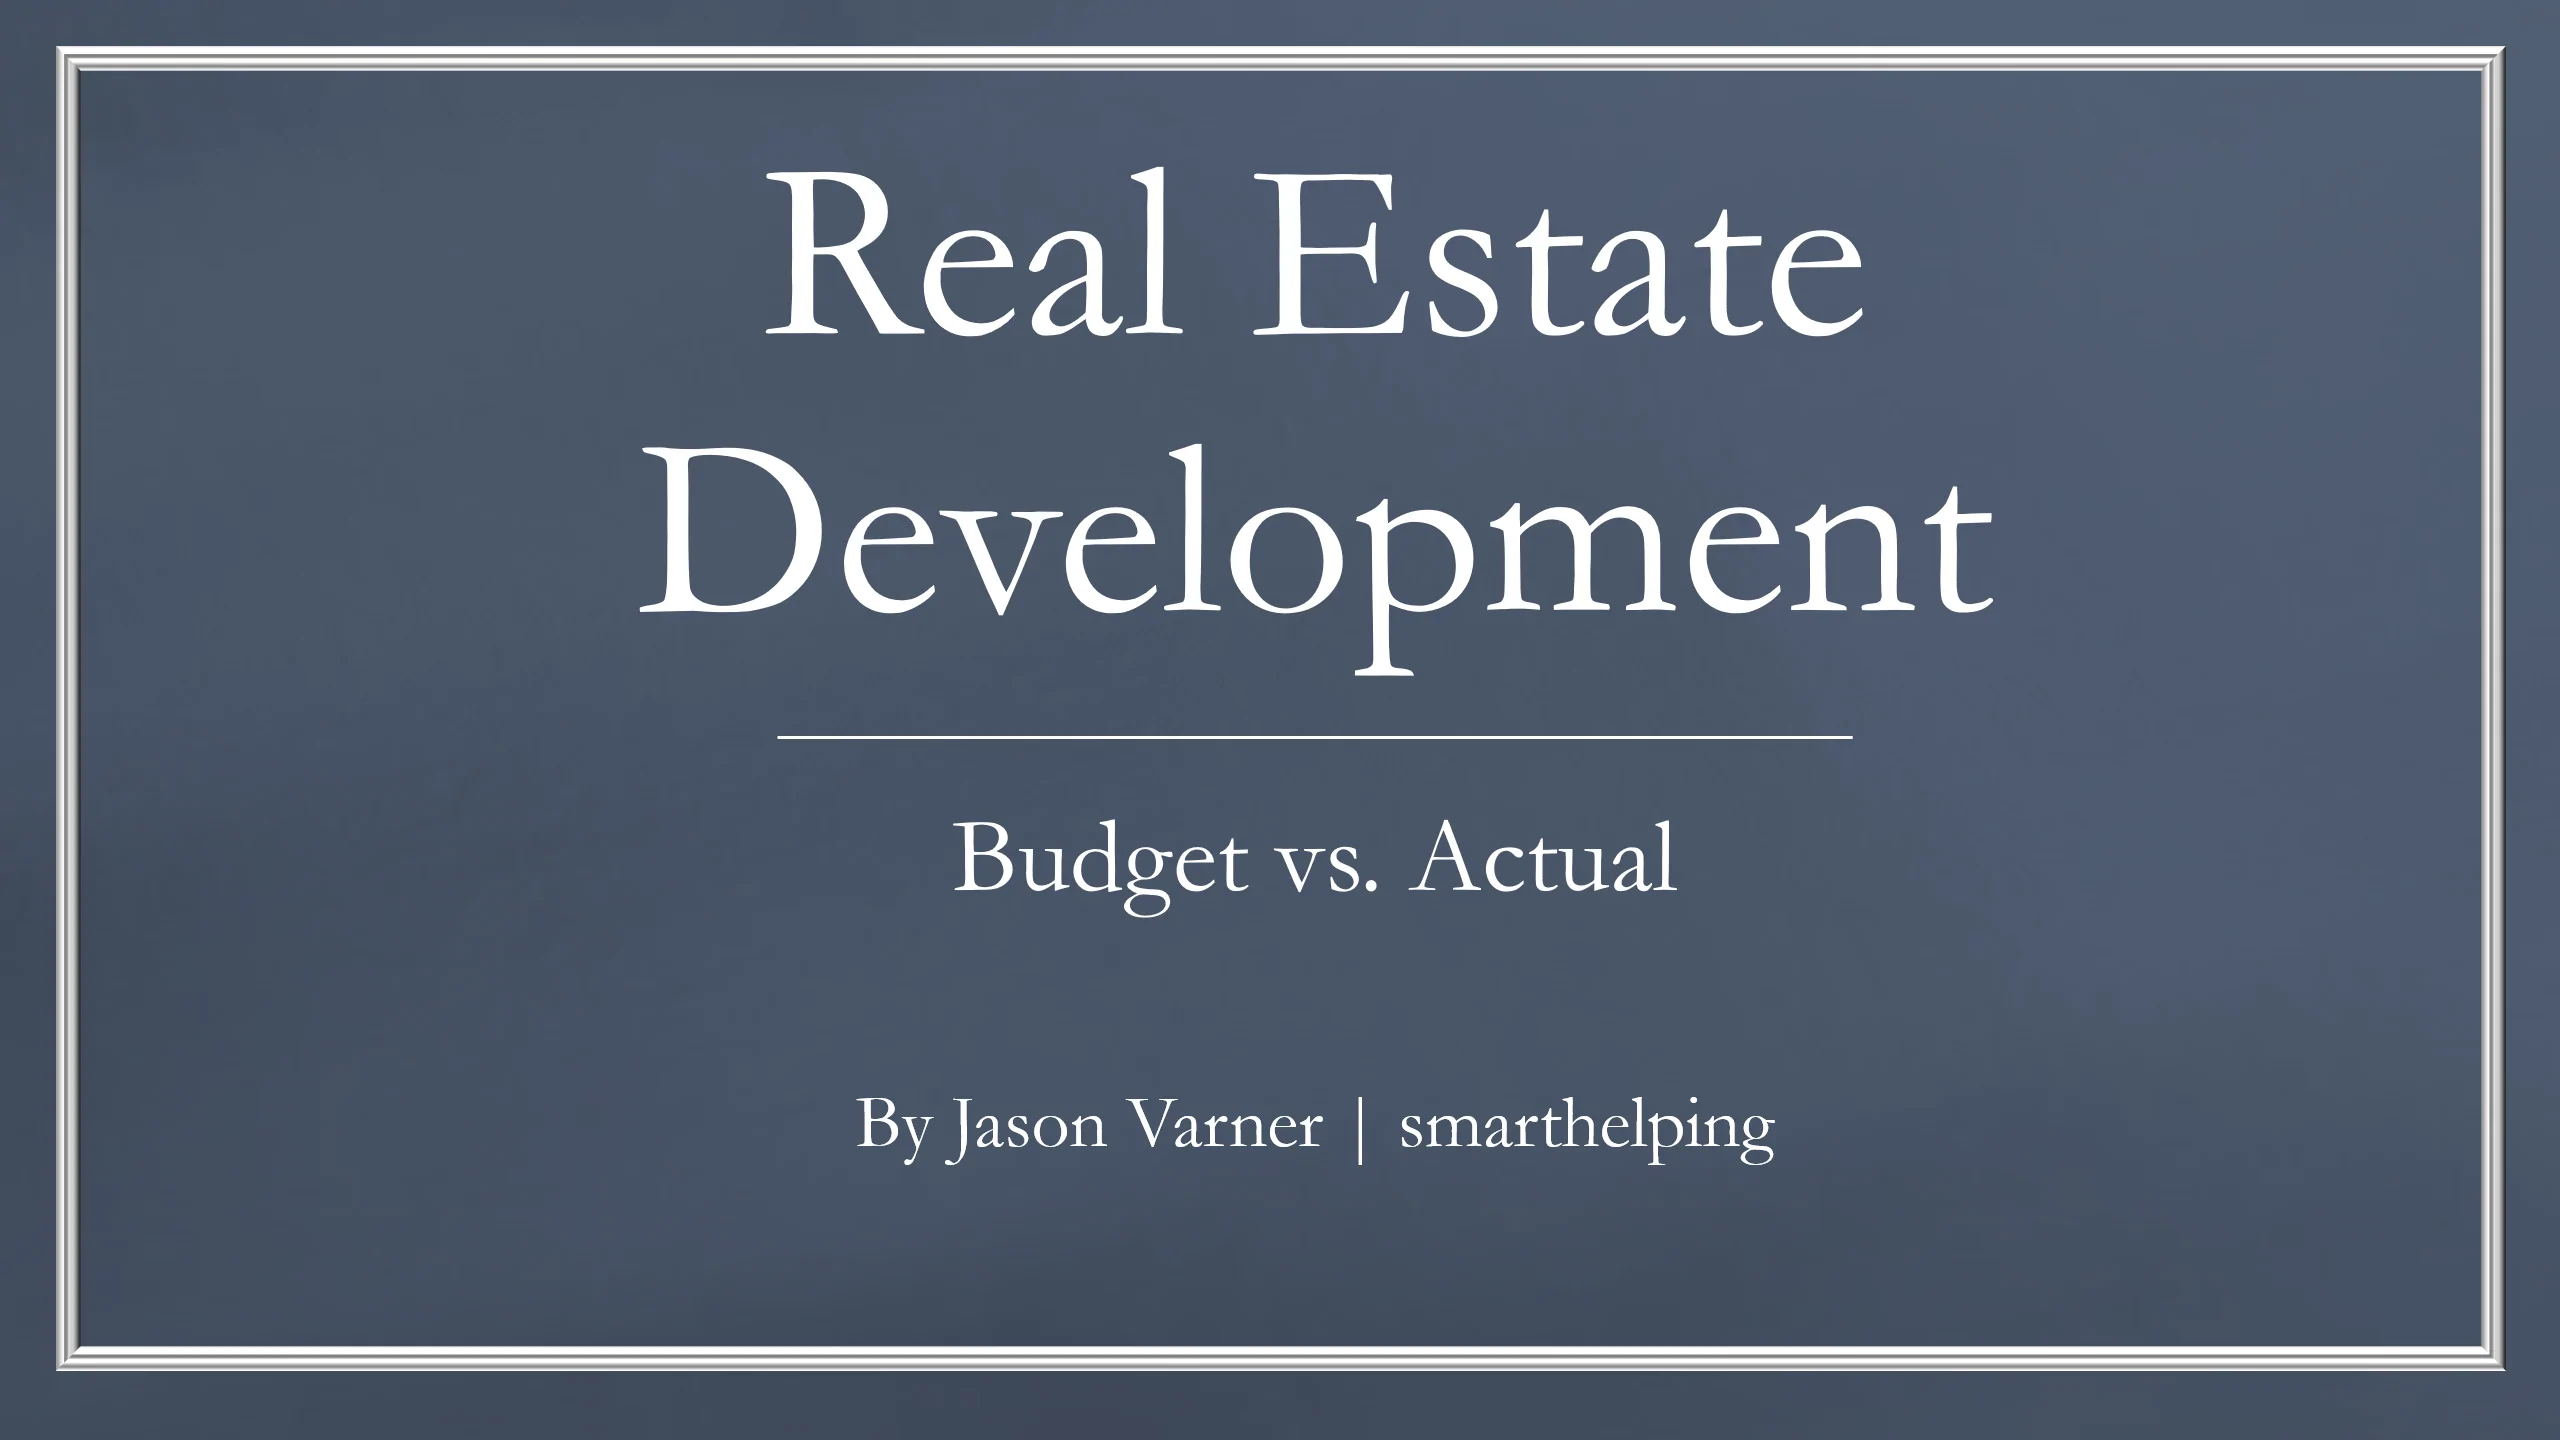 Real Estate Development: Budget vs. Actual Investment Analysis